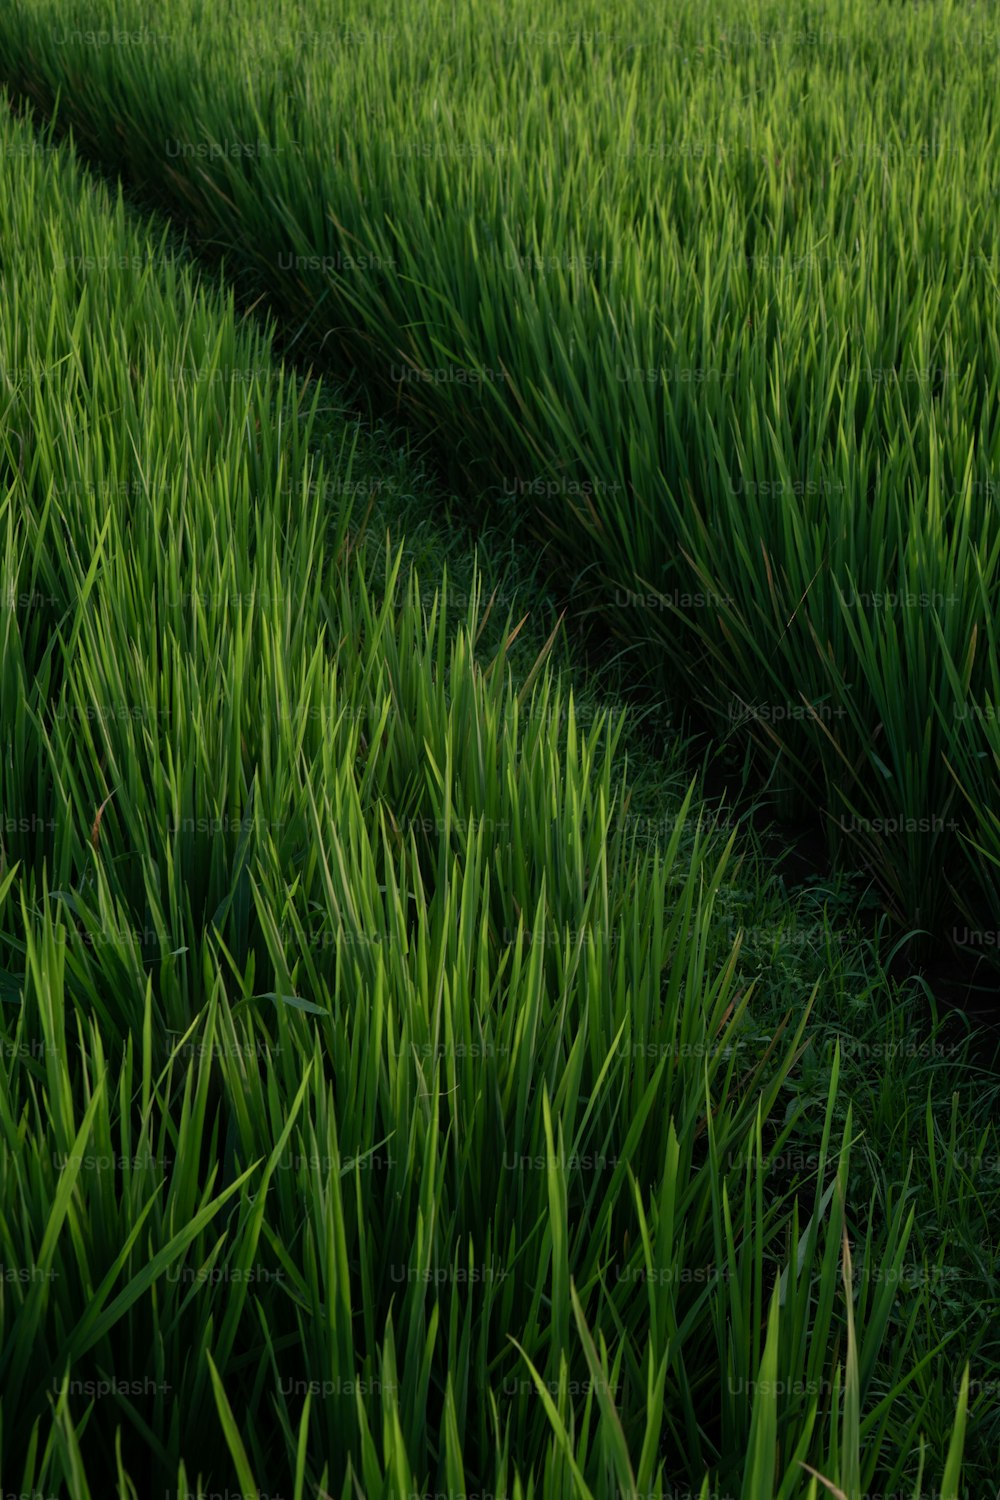 a field of green grass is shown in the foreground